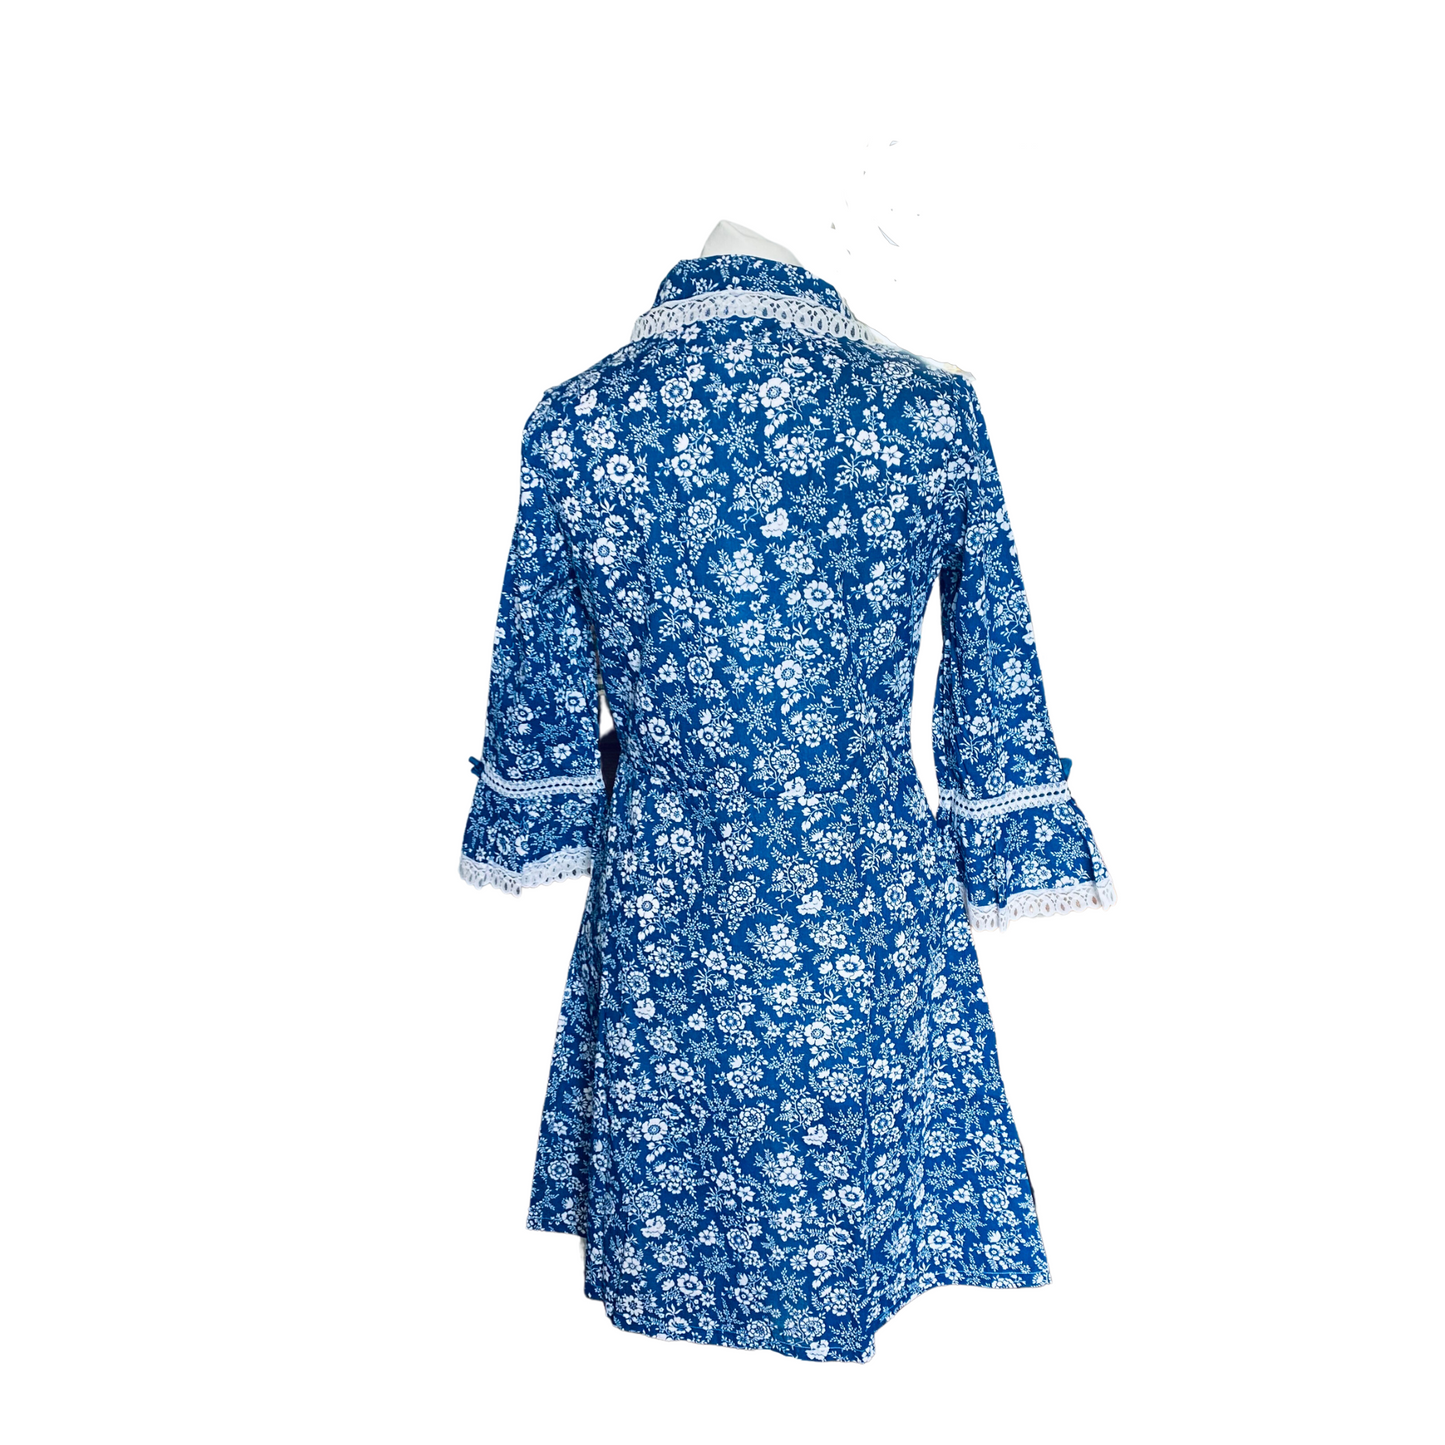 60s/70s blue and white floral mini prairie dress with white  lace trim. Approx UK. size 8-10